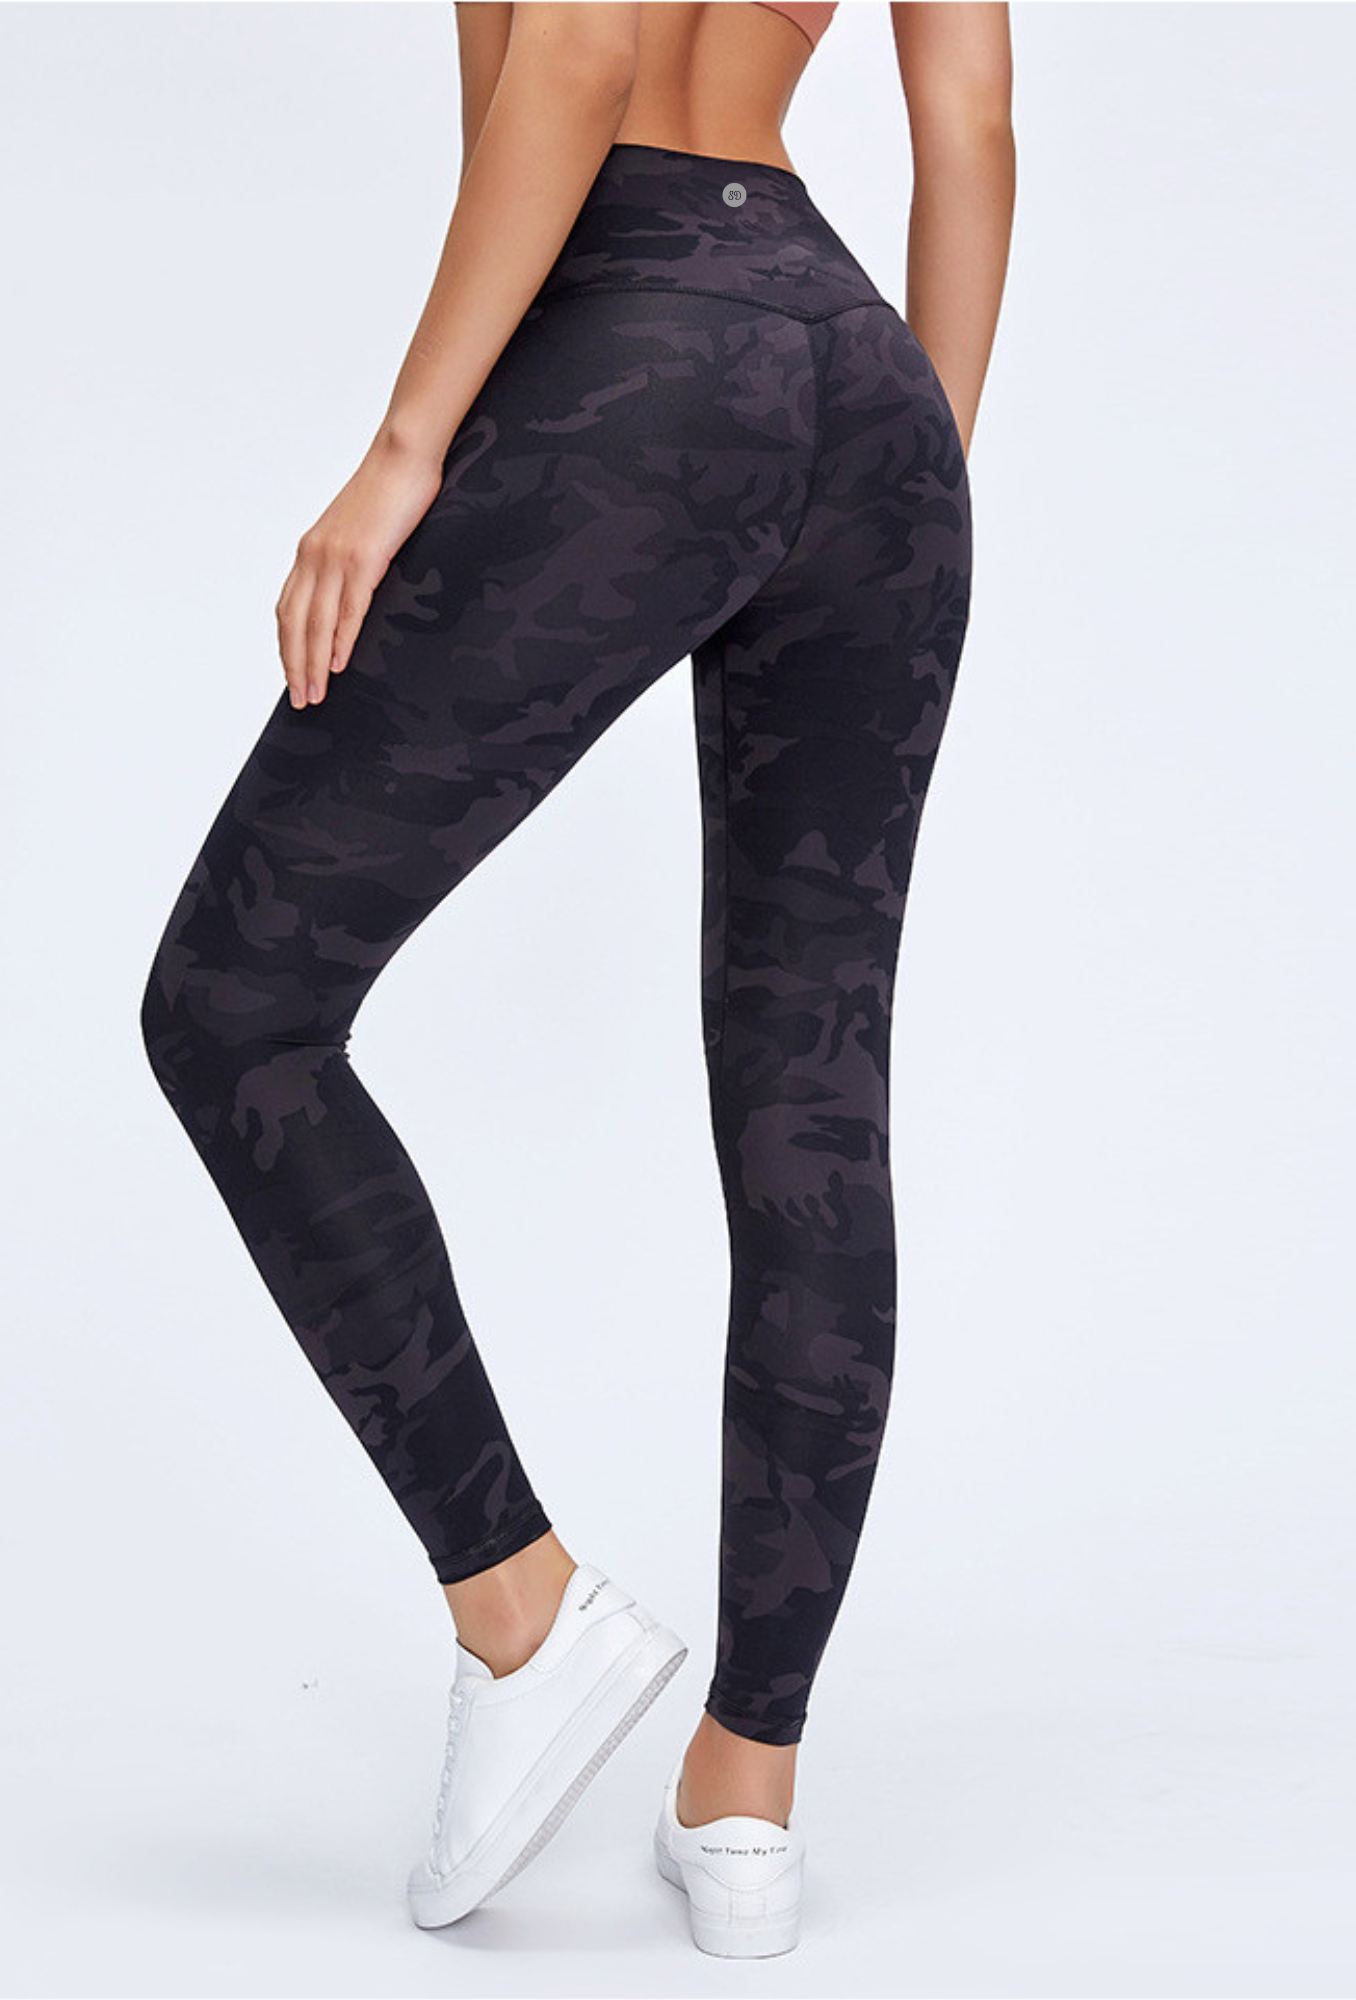 Diva Solid Fit High Waist Legging – Divine Lily Silhouette